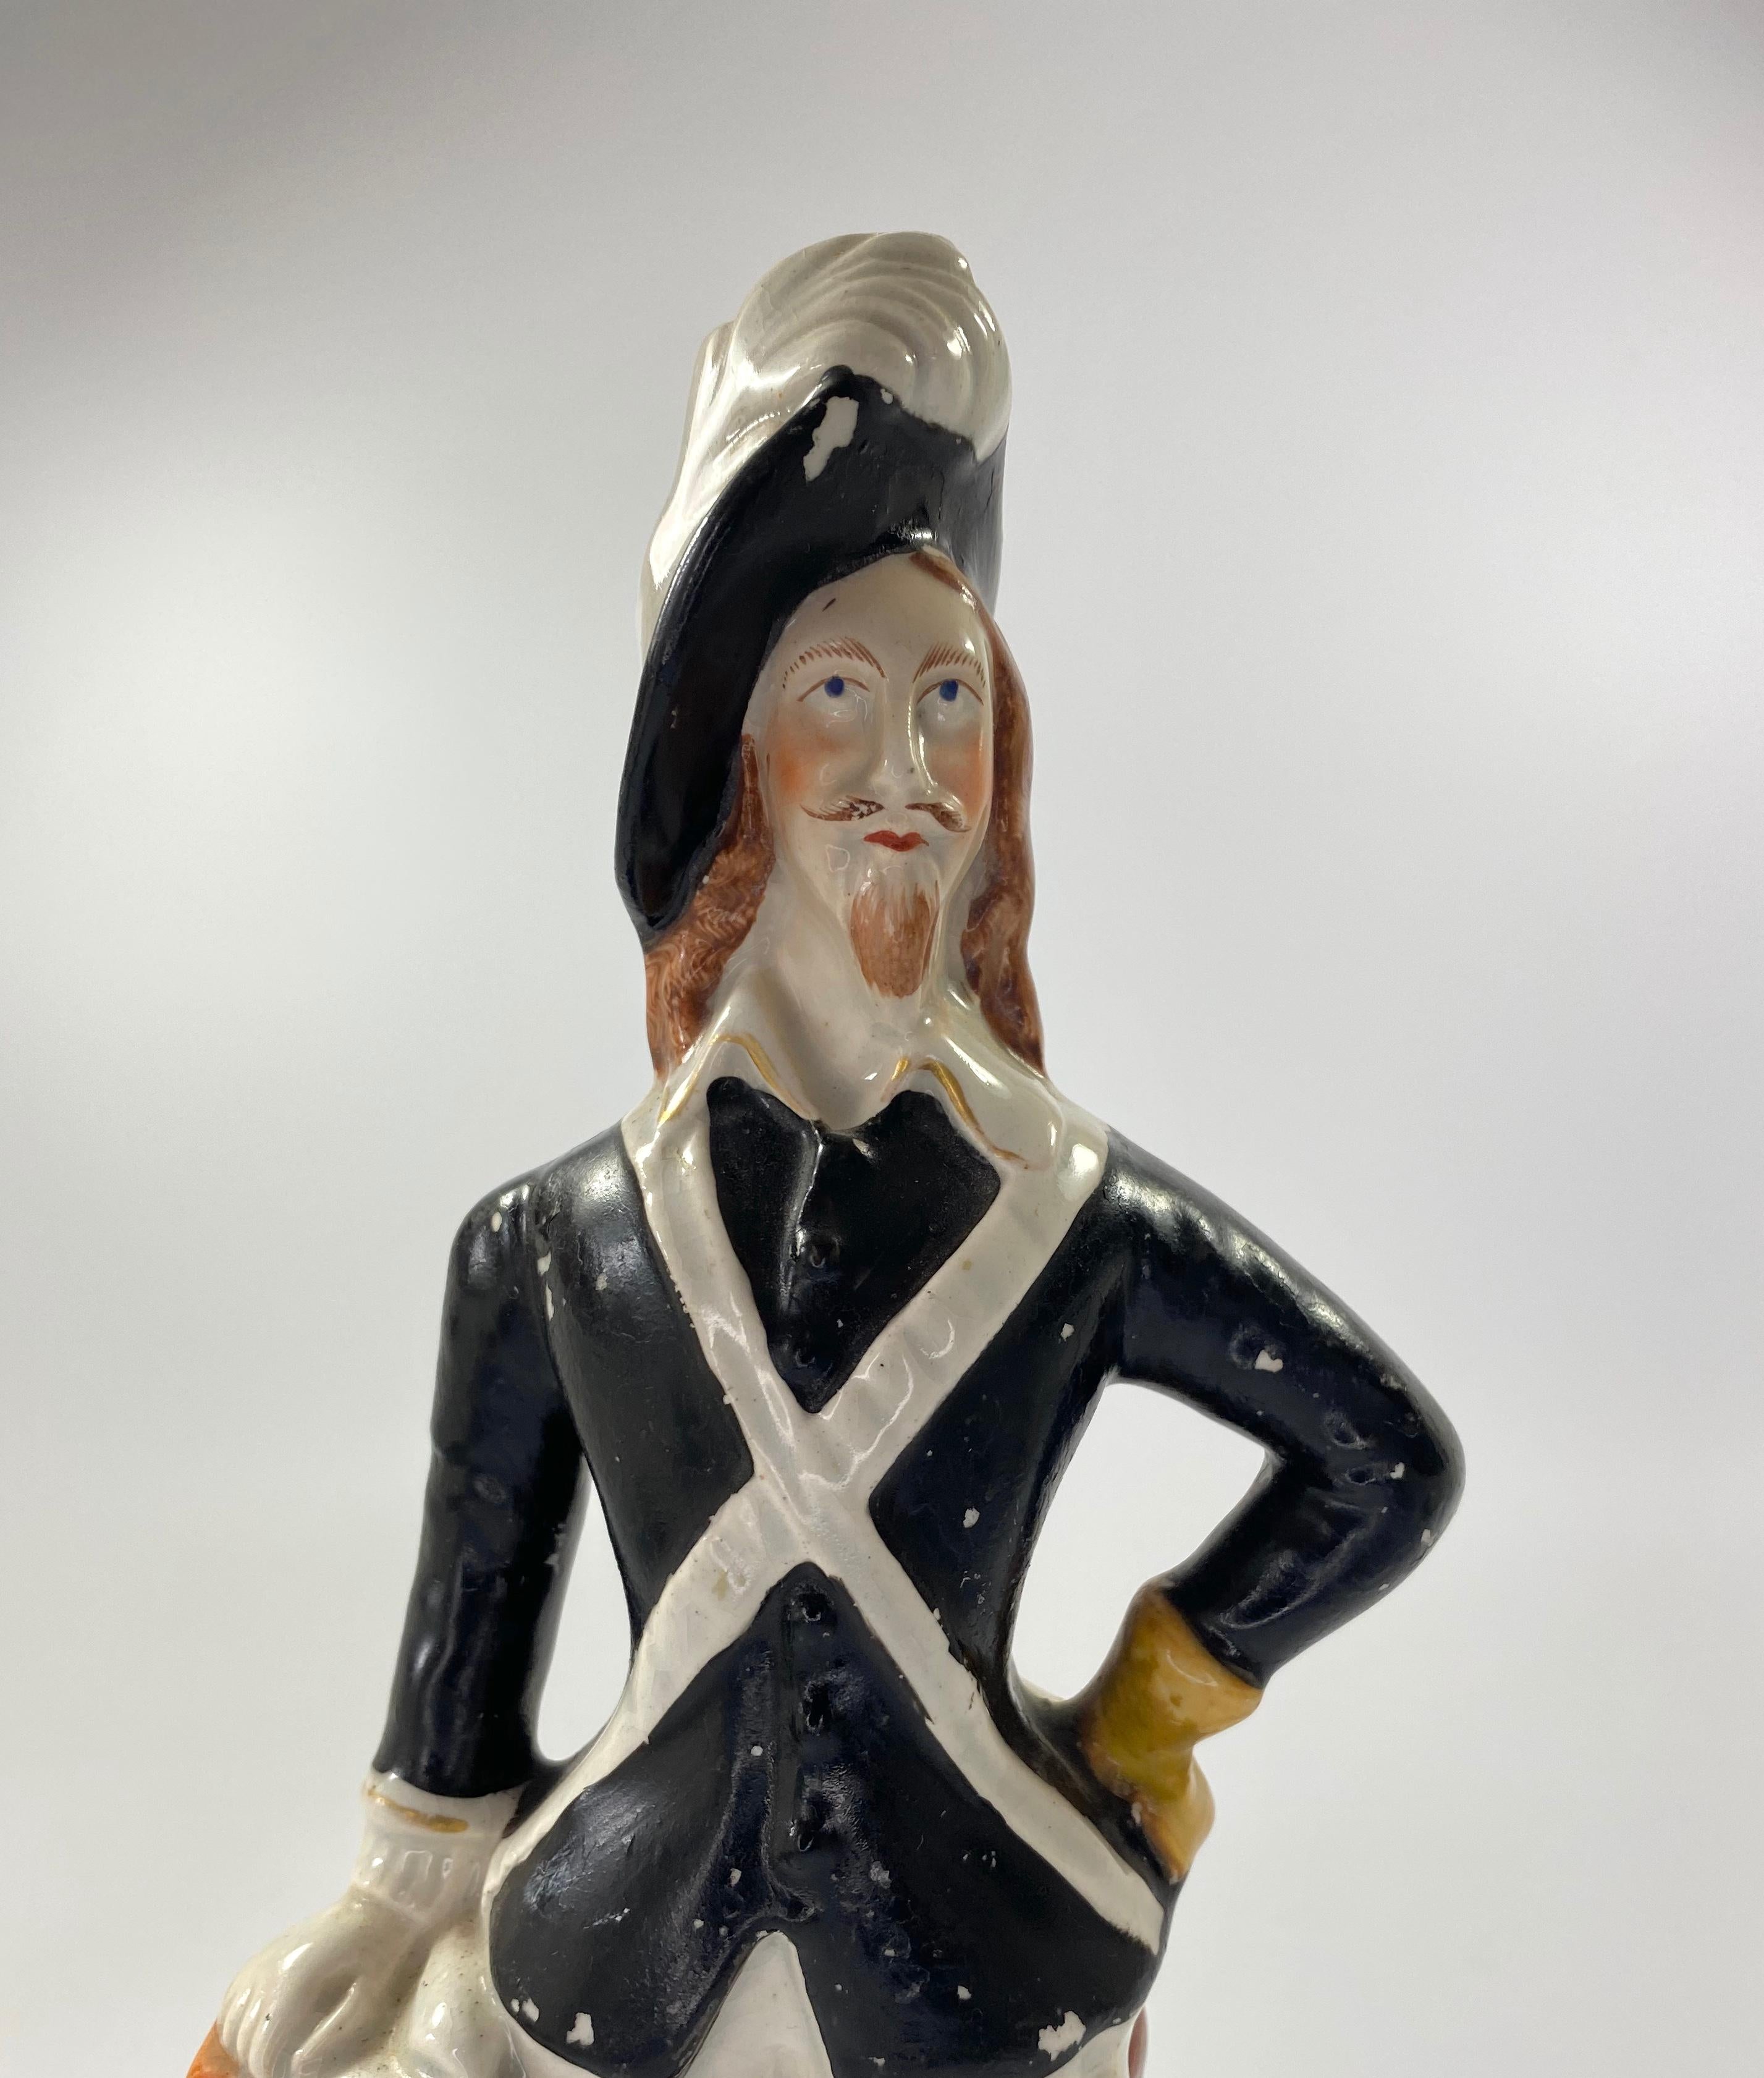 SOLD
Staffordshire pottery figure of King Charles I, Thomas Parr factory, c. 1860. The King, wearing a plumed hat, and standing next to a square pedestal, upon which rests a scroll. His sword resting against the support, behind him. Set upon a